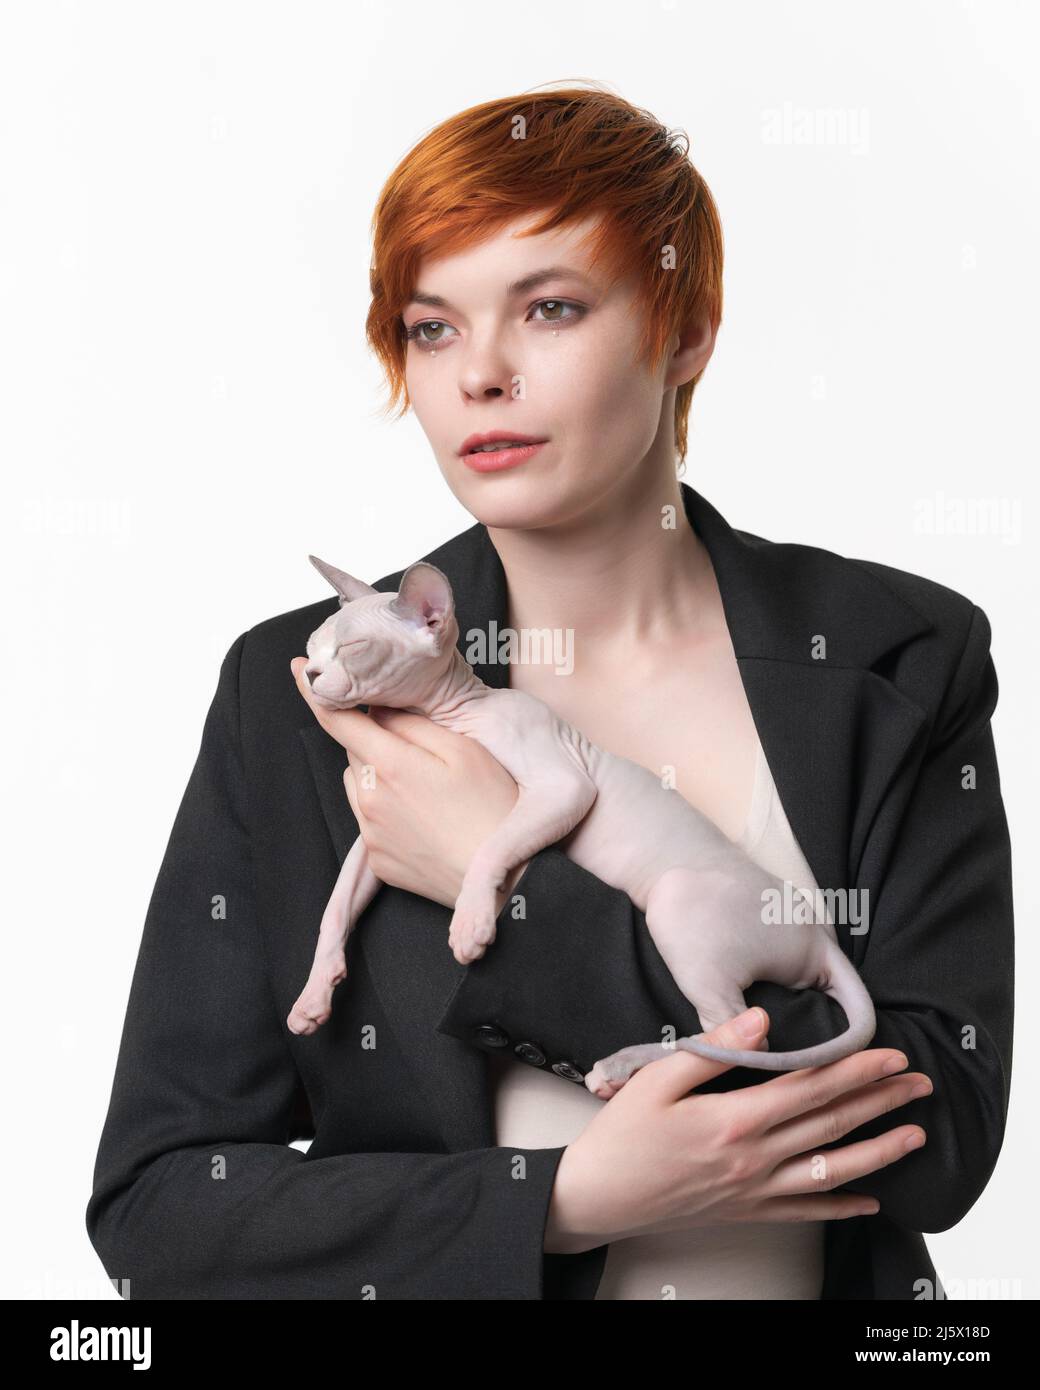 Young woman with short hair holding in hands sleeping Sphynx Hairless Cat blue mink and white color. Beautiful redhead woman dressed in black jacket Stock Photo